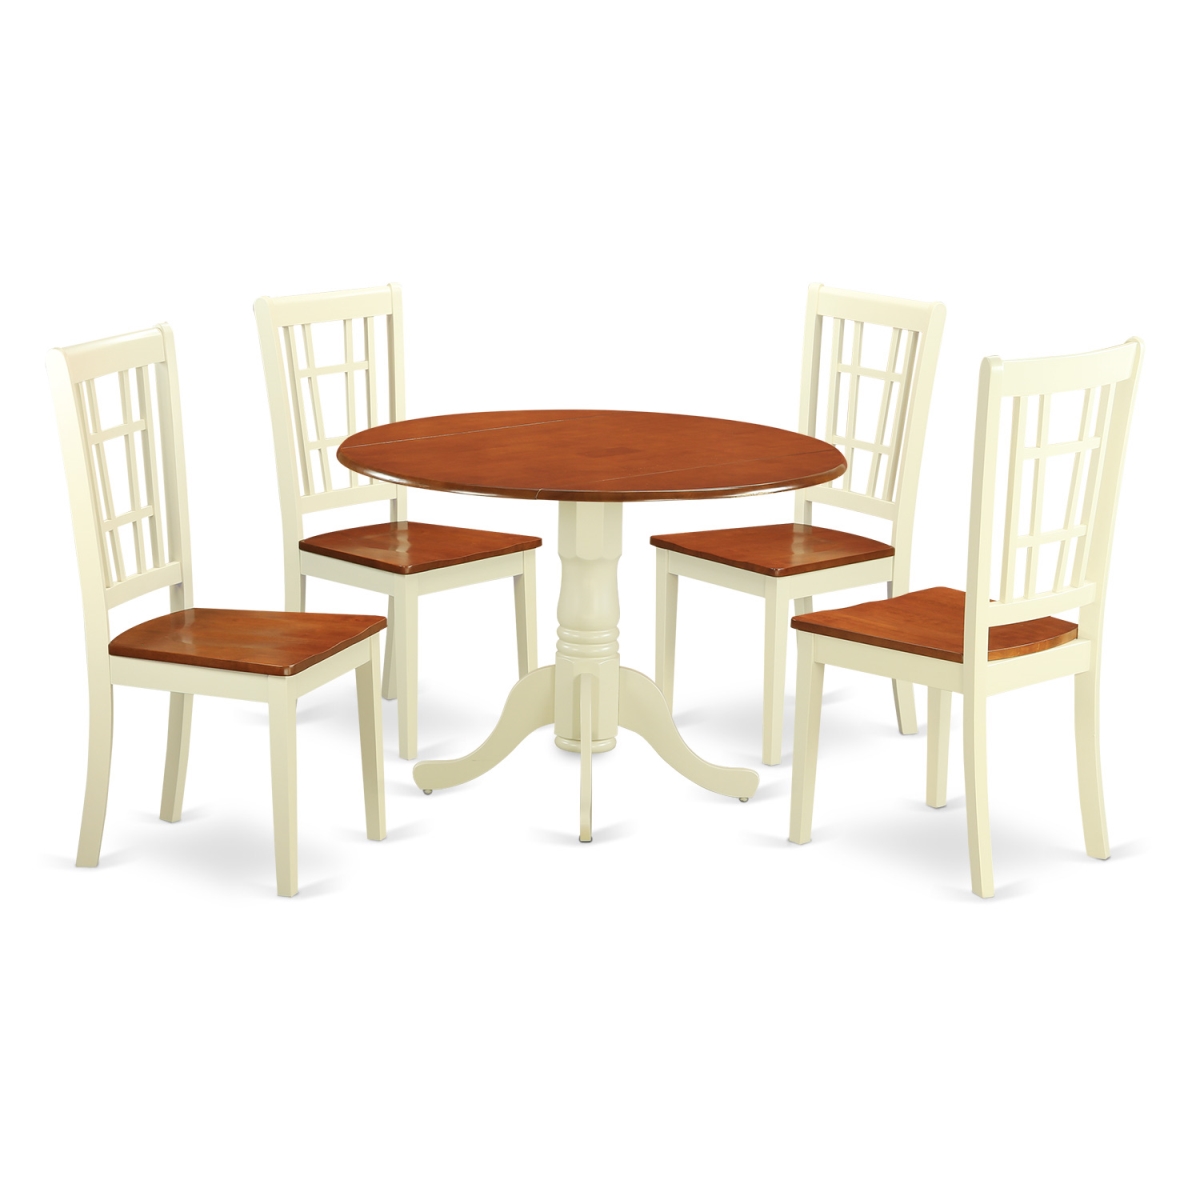 Picture of East West Furniture DLNI5-BMK-W Dining Room Sets with 4 Table & 4 Chairs, Buttermilk & Cherry - 5 Piece